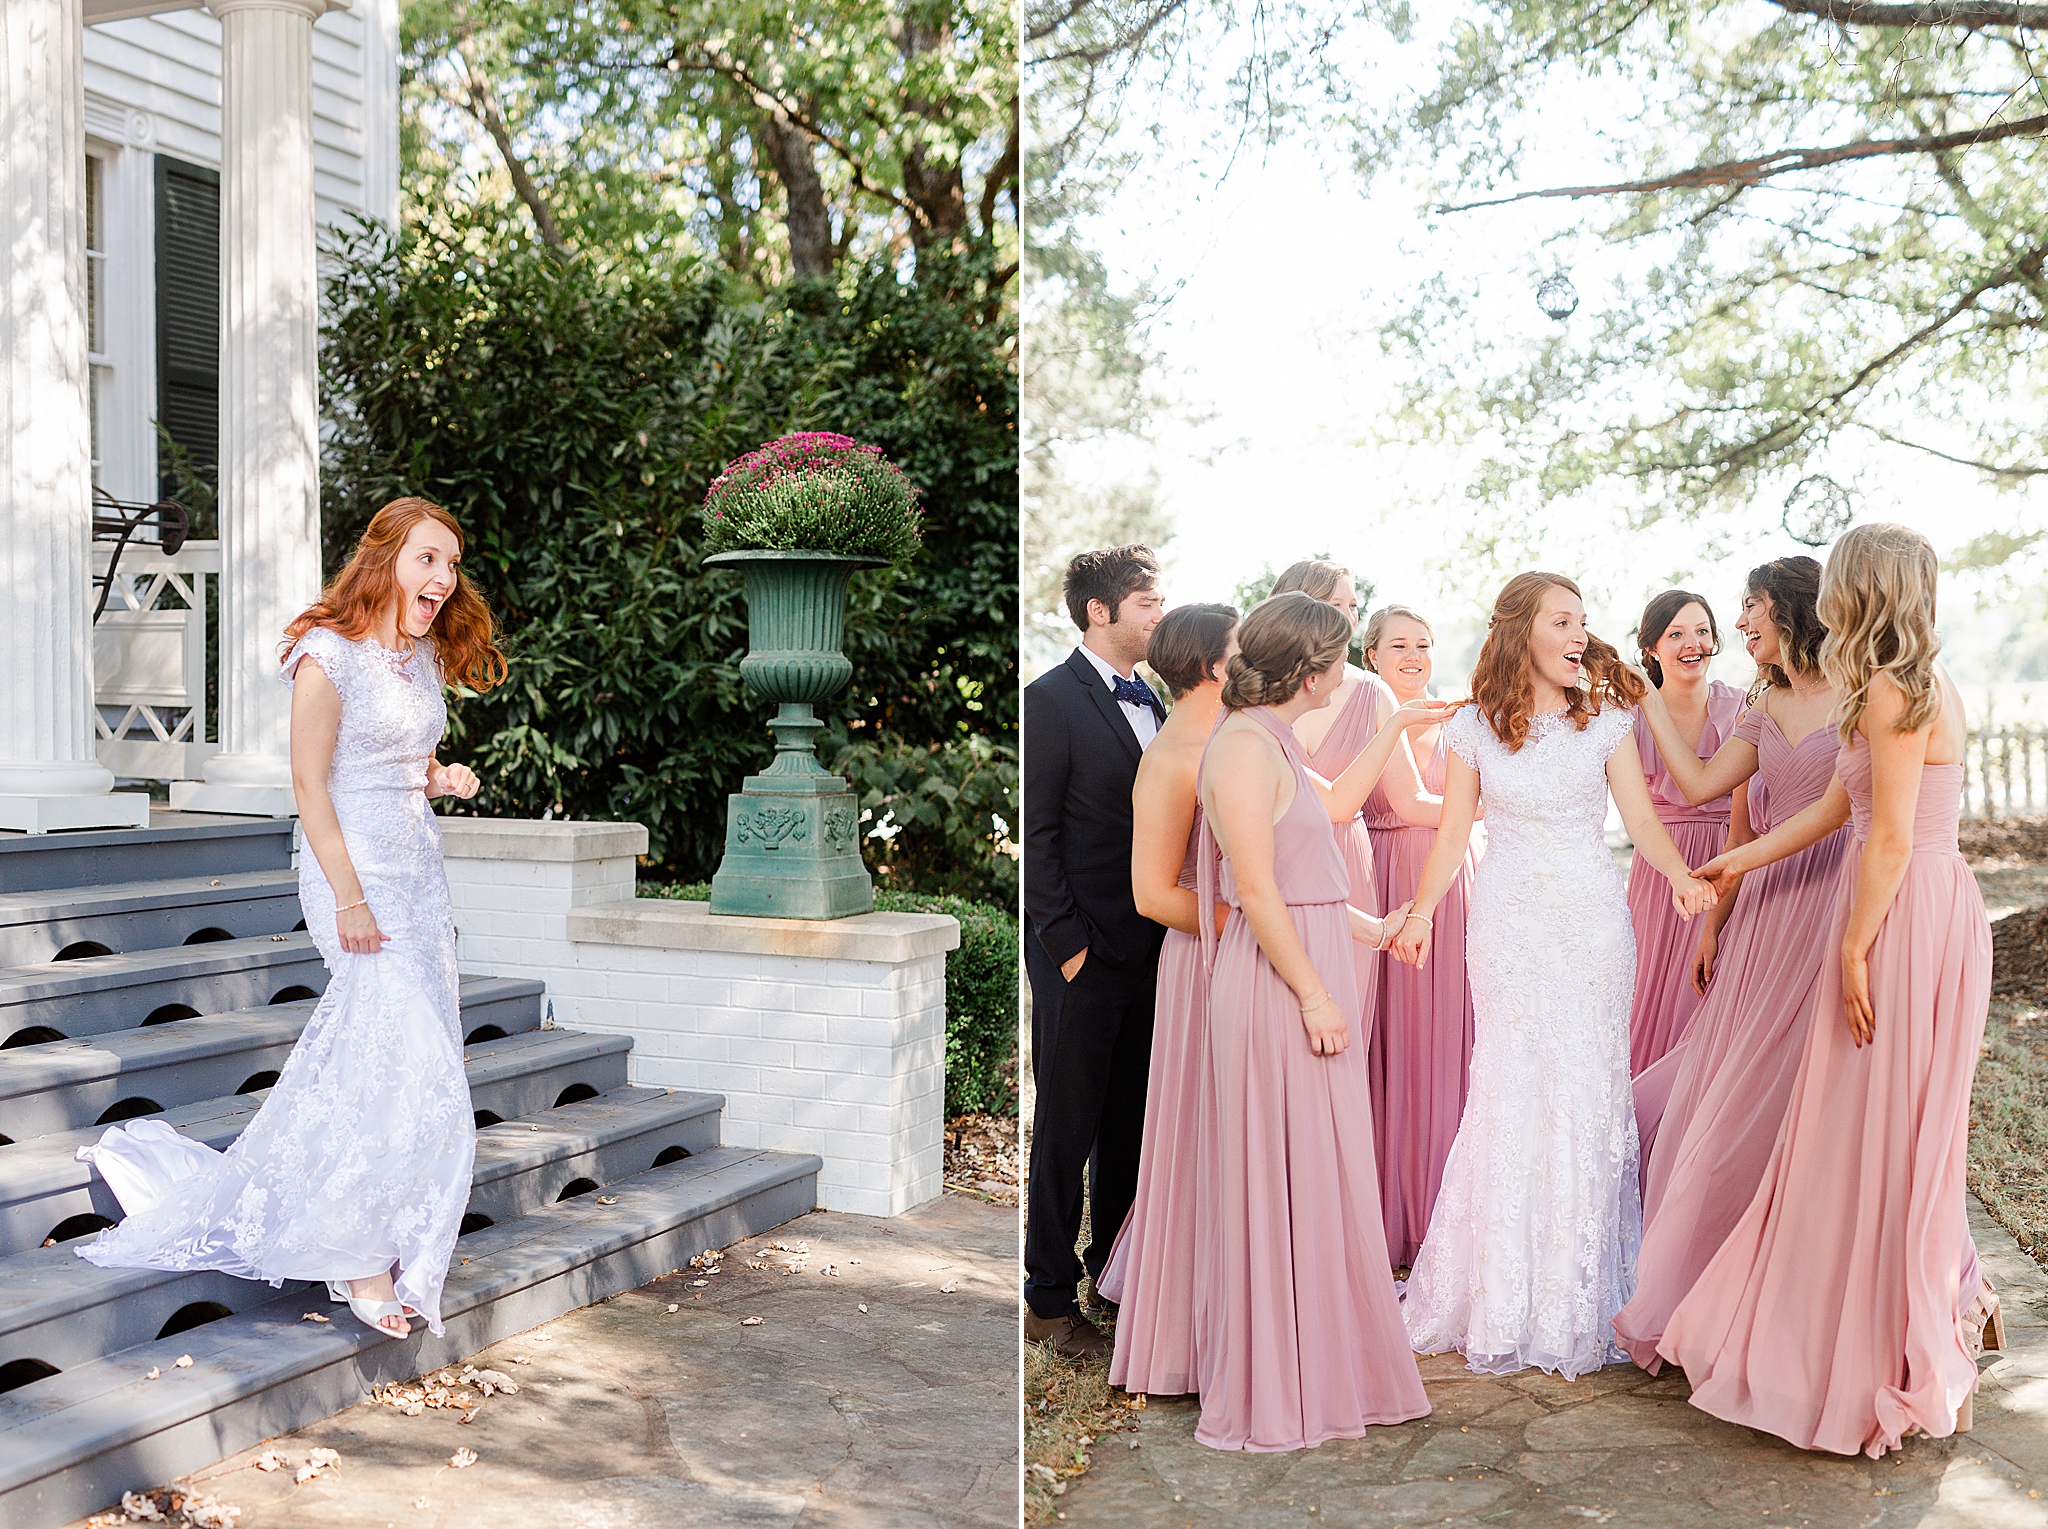 bride approaches bridesmaids and bridesman before classic Southern wedding